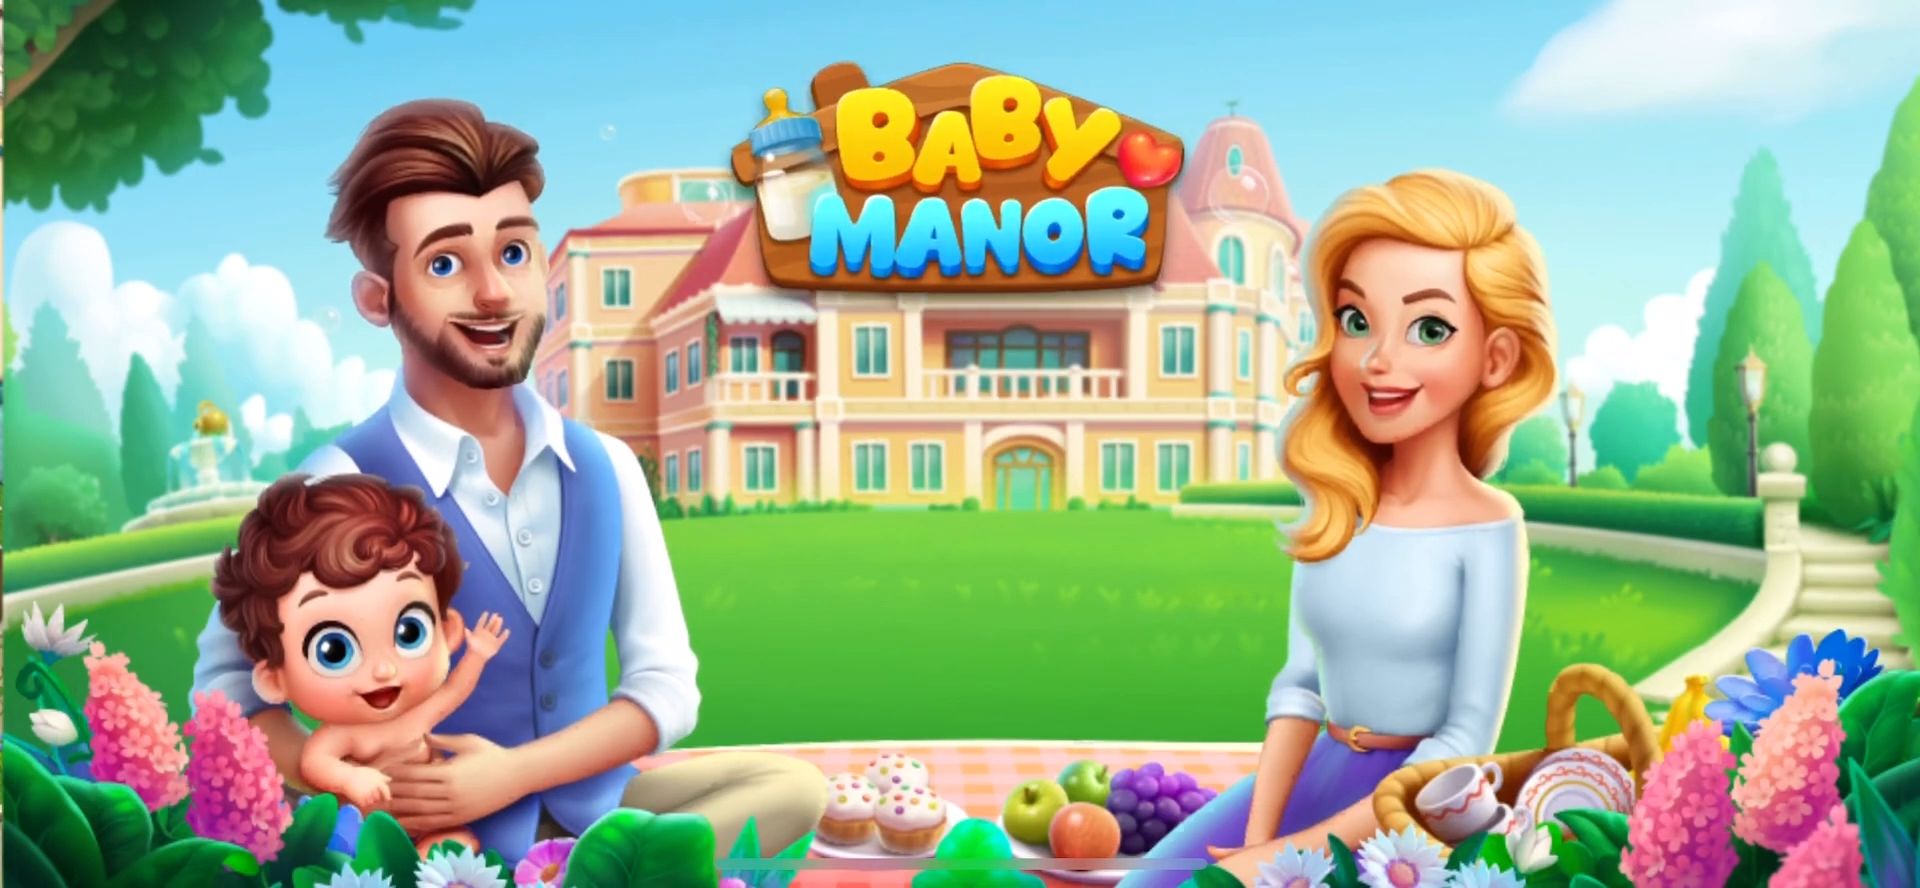 Baby Manor: Baby Raising Simulation & Home Design for Android